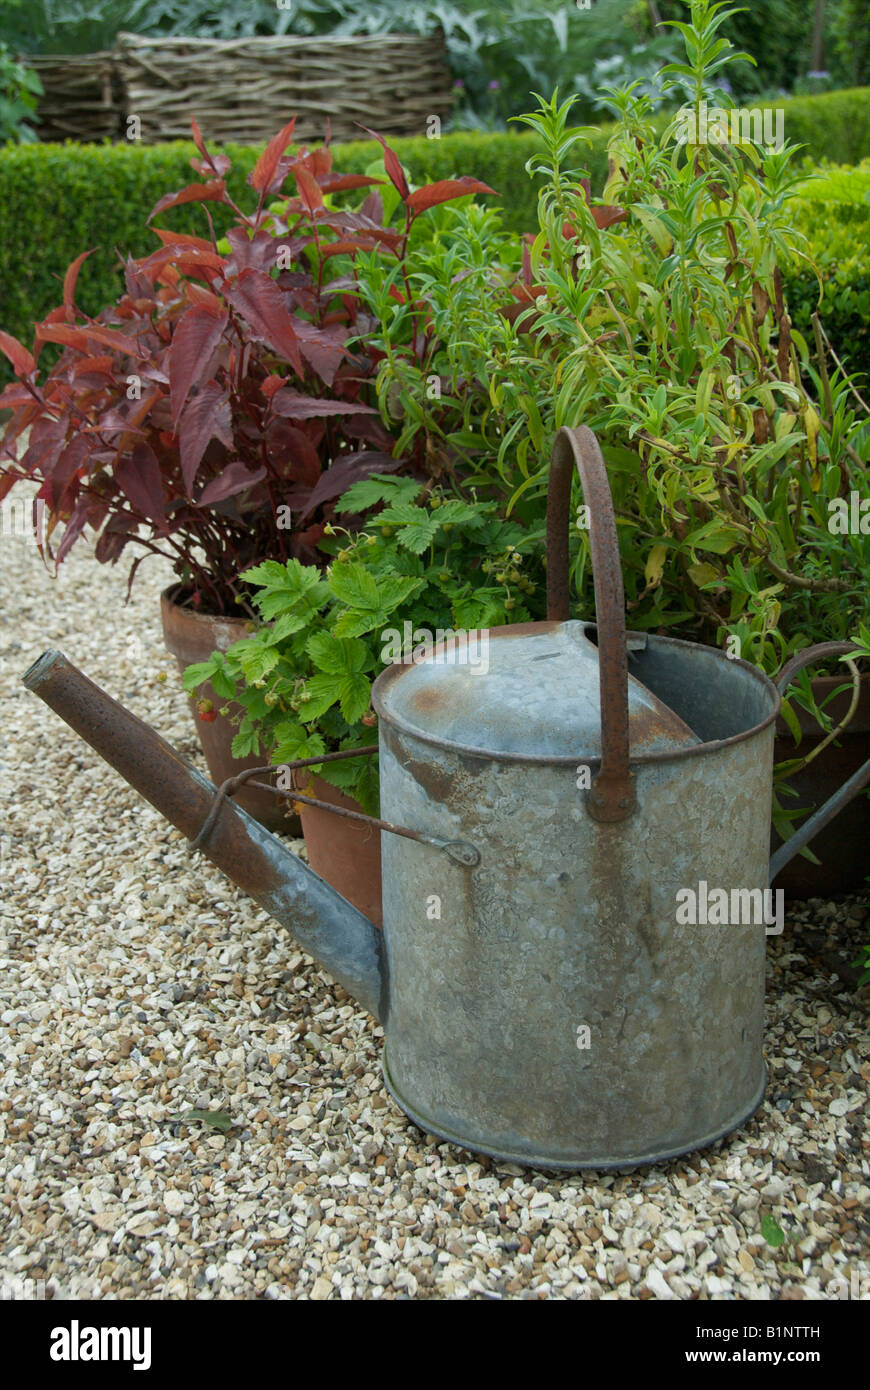 Tin watering can and plants in garden Stock Photo